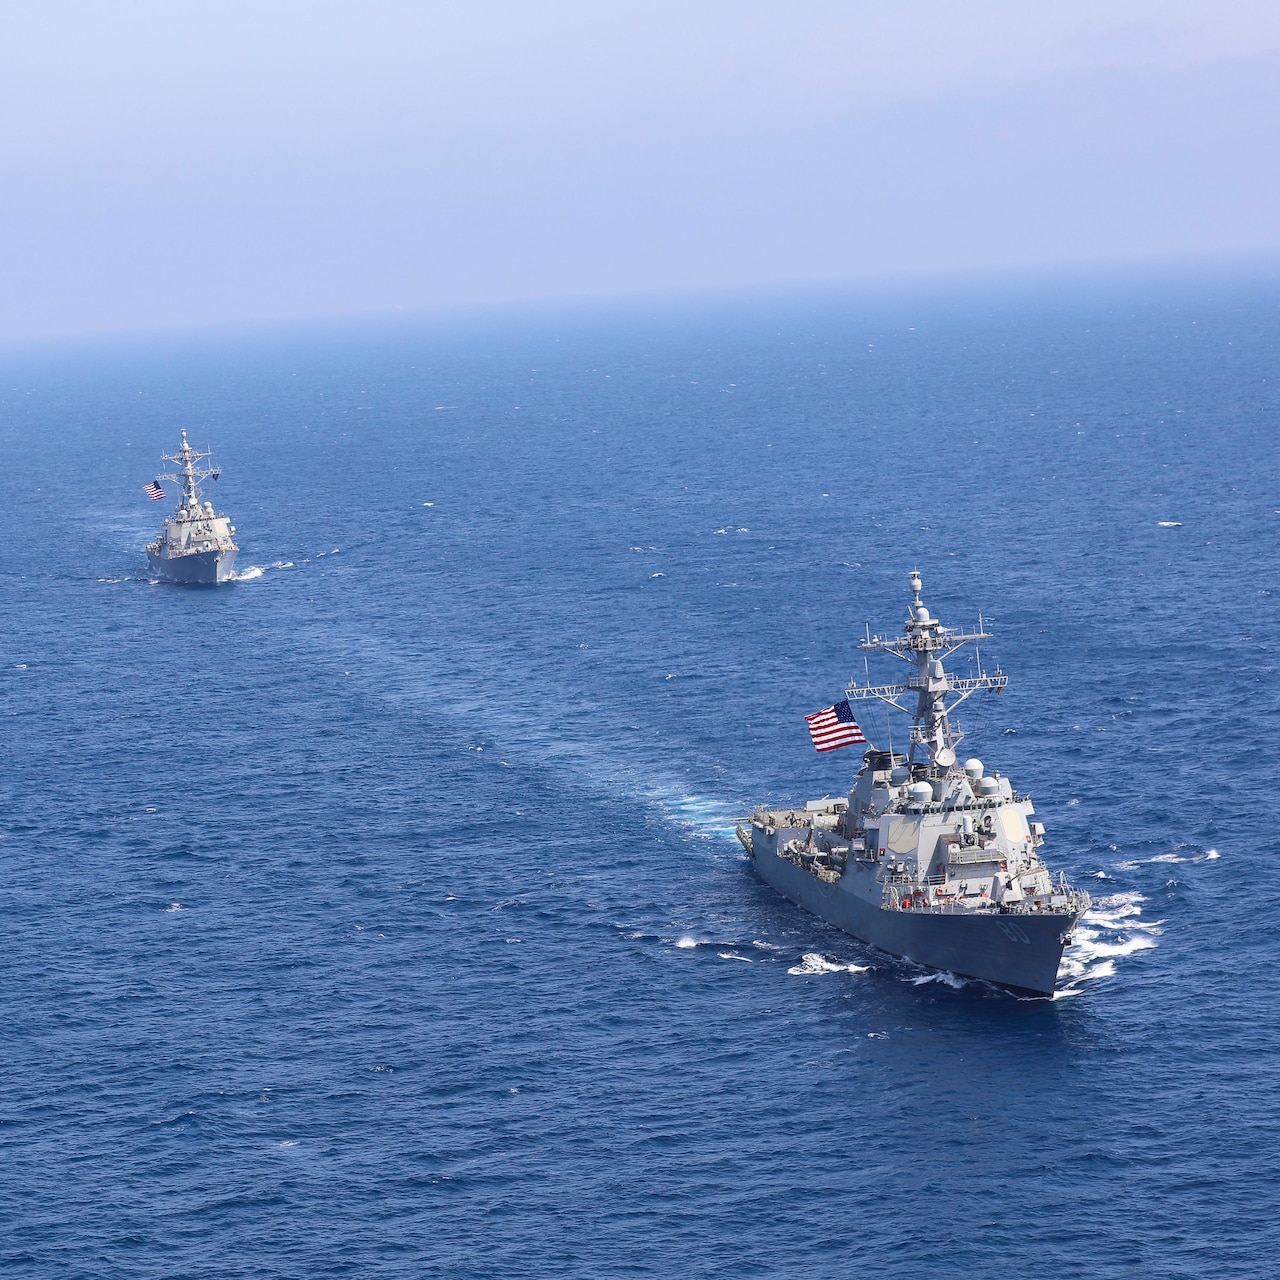 210415-N-CJ510-0226 MEDITERRANEAN SEA (April 15, 2021) The Arleigh Burke-class guided-missile destroyer USS Roosevelt (DDG 80), front, and the Arleigh Burke-class guided-missile destroyer USS Donald Cook (DDG 75) sail in formation, April 15, 2021. Roosevelt, forward-deployed to Rota, Spain, is on its second patrol in the U.S. Sixth Fleet area of operations in support of regional allies and partners and U.S. national security interests in Europe and Africa. (U.S. Navy photo by Naval Air Crewman 2nd Class Joshua Kautzman)